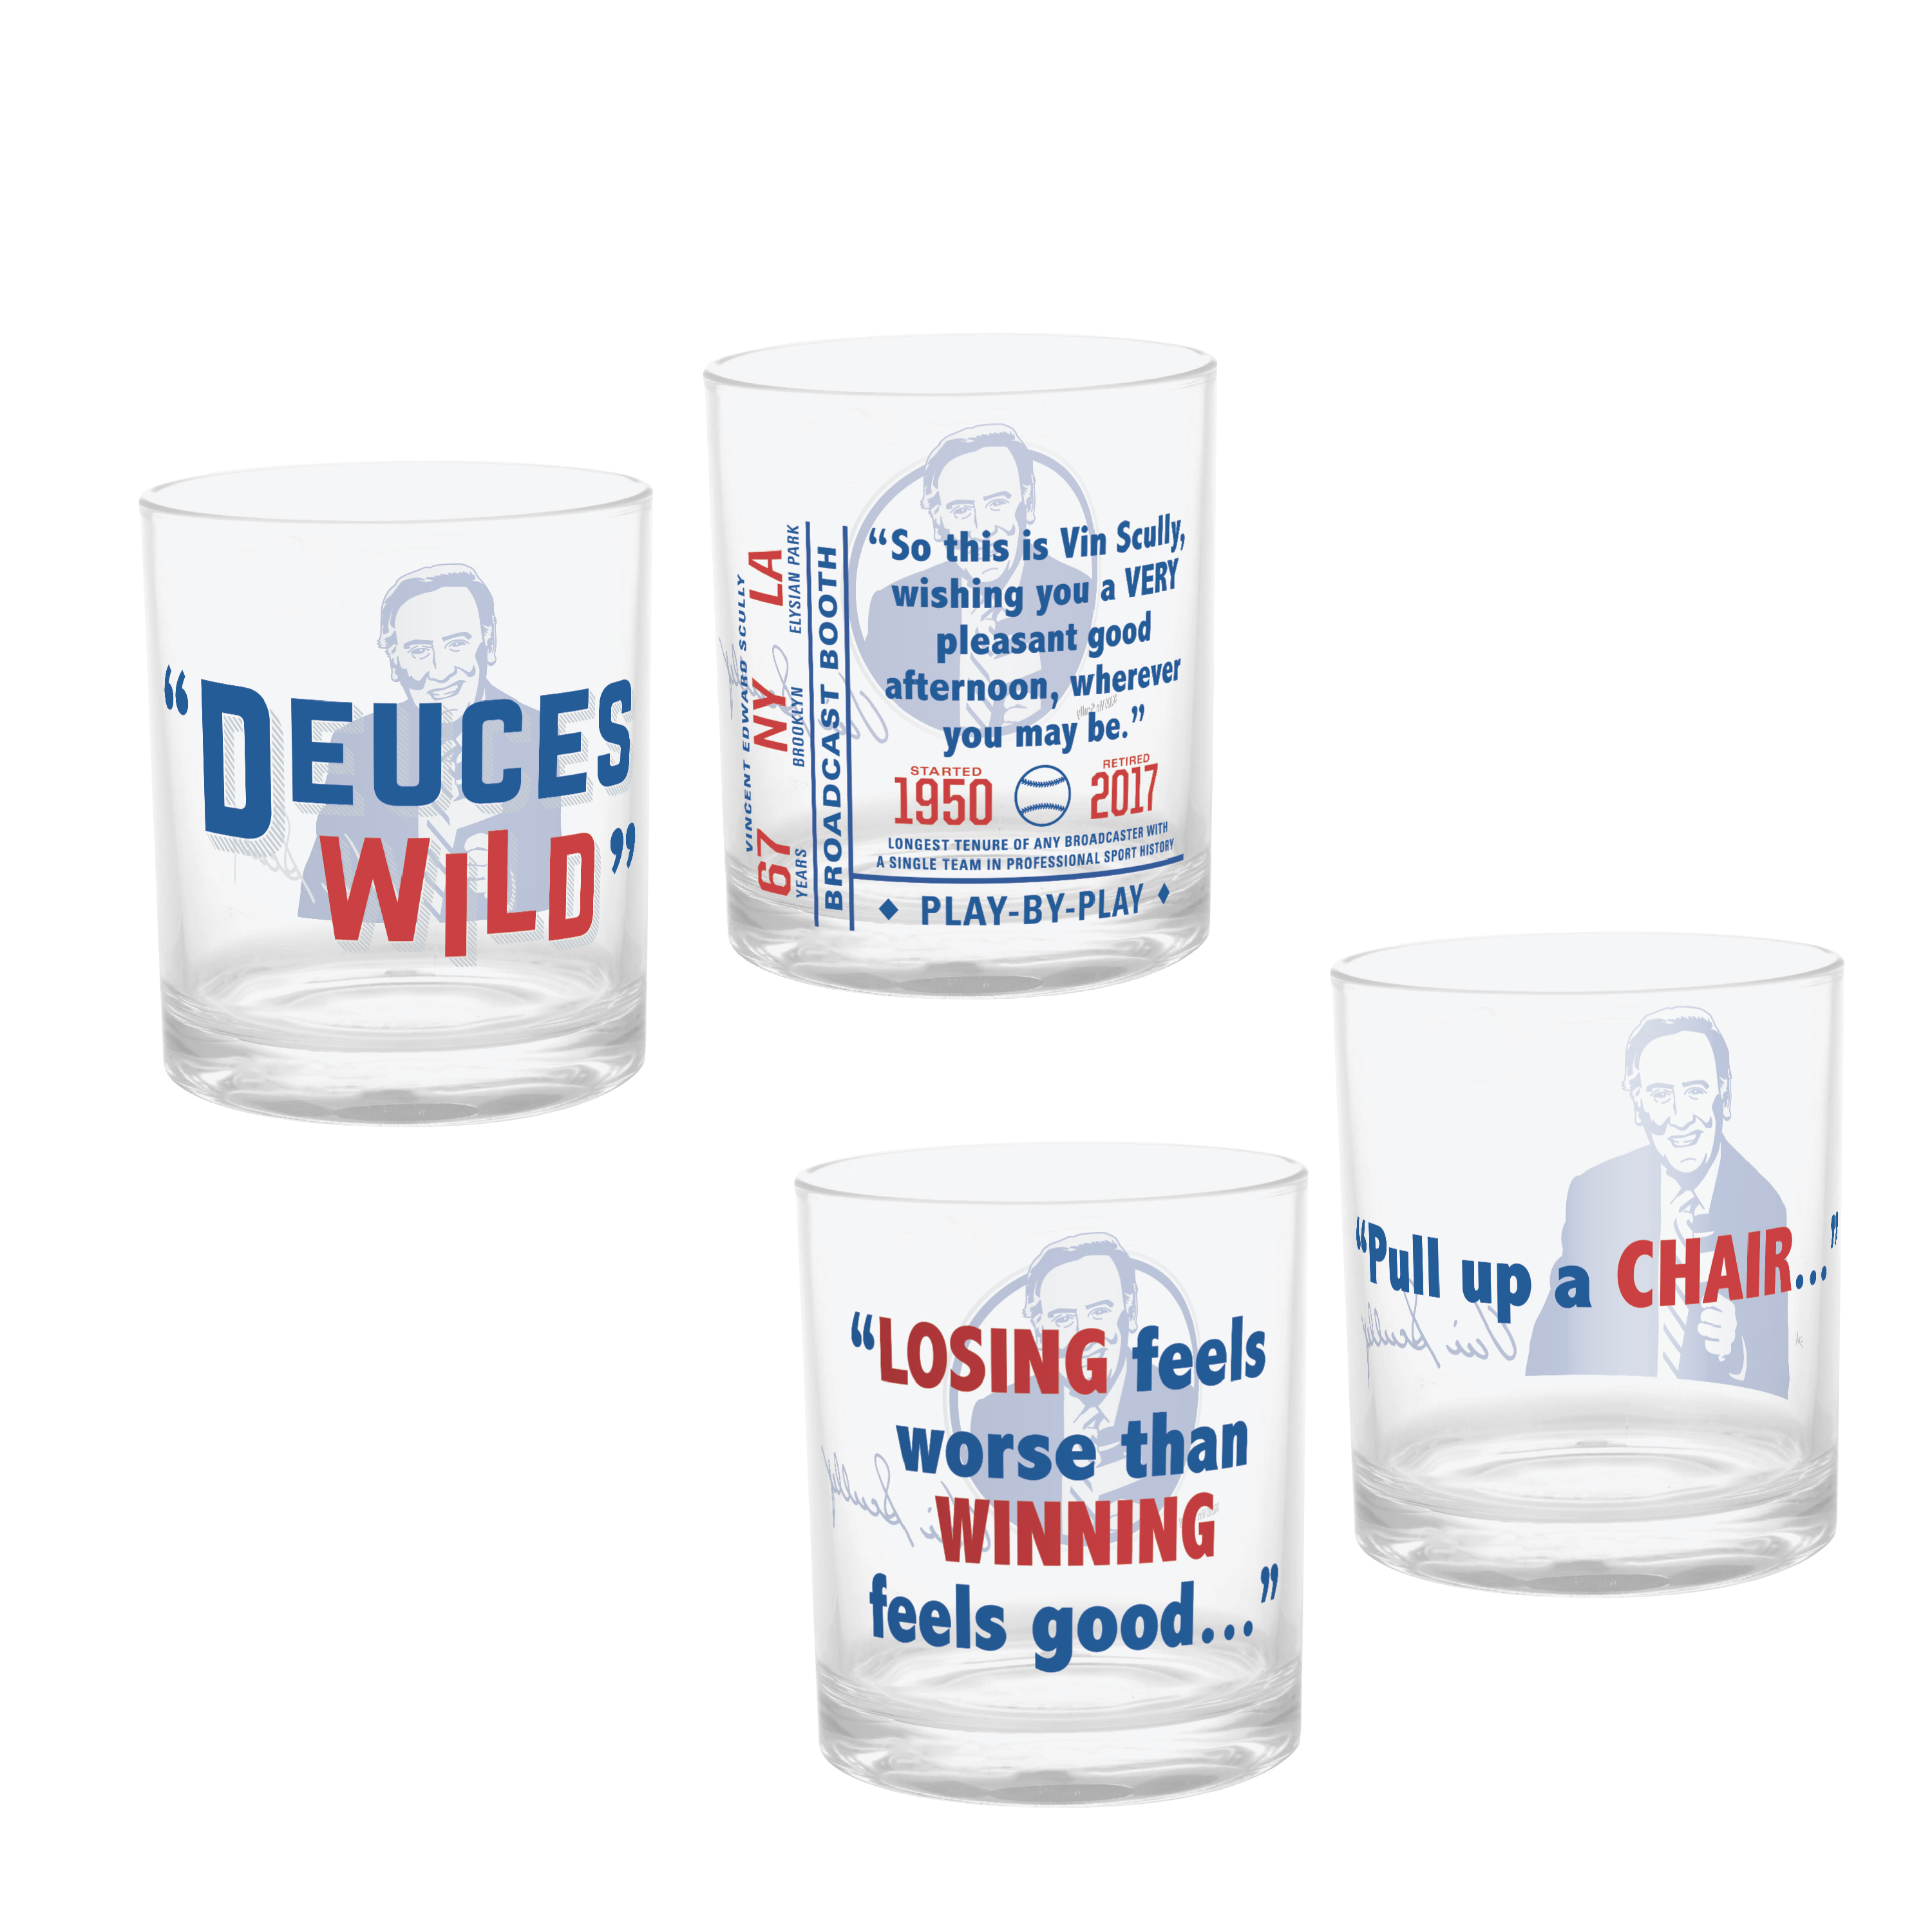 Zak Hydration 14 ounce Plastic Double Old-fashion Glass, Vin Scully, 4-piece set slideshow image 1